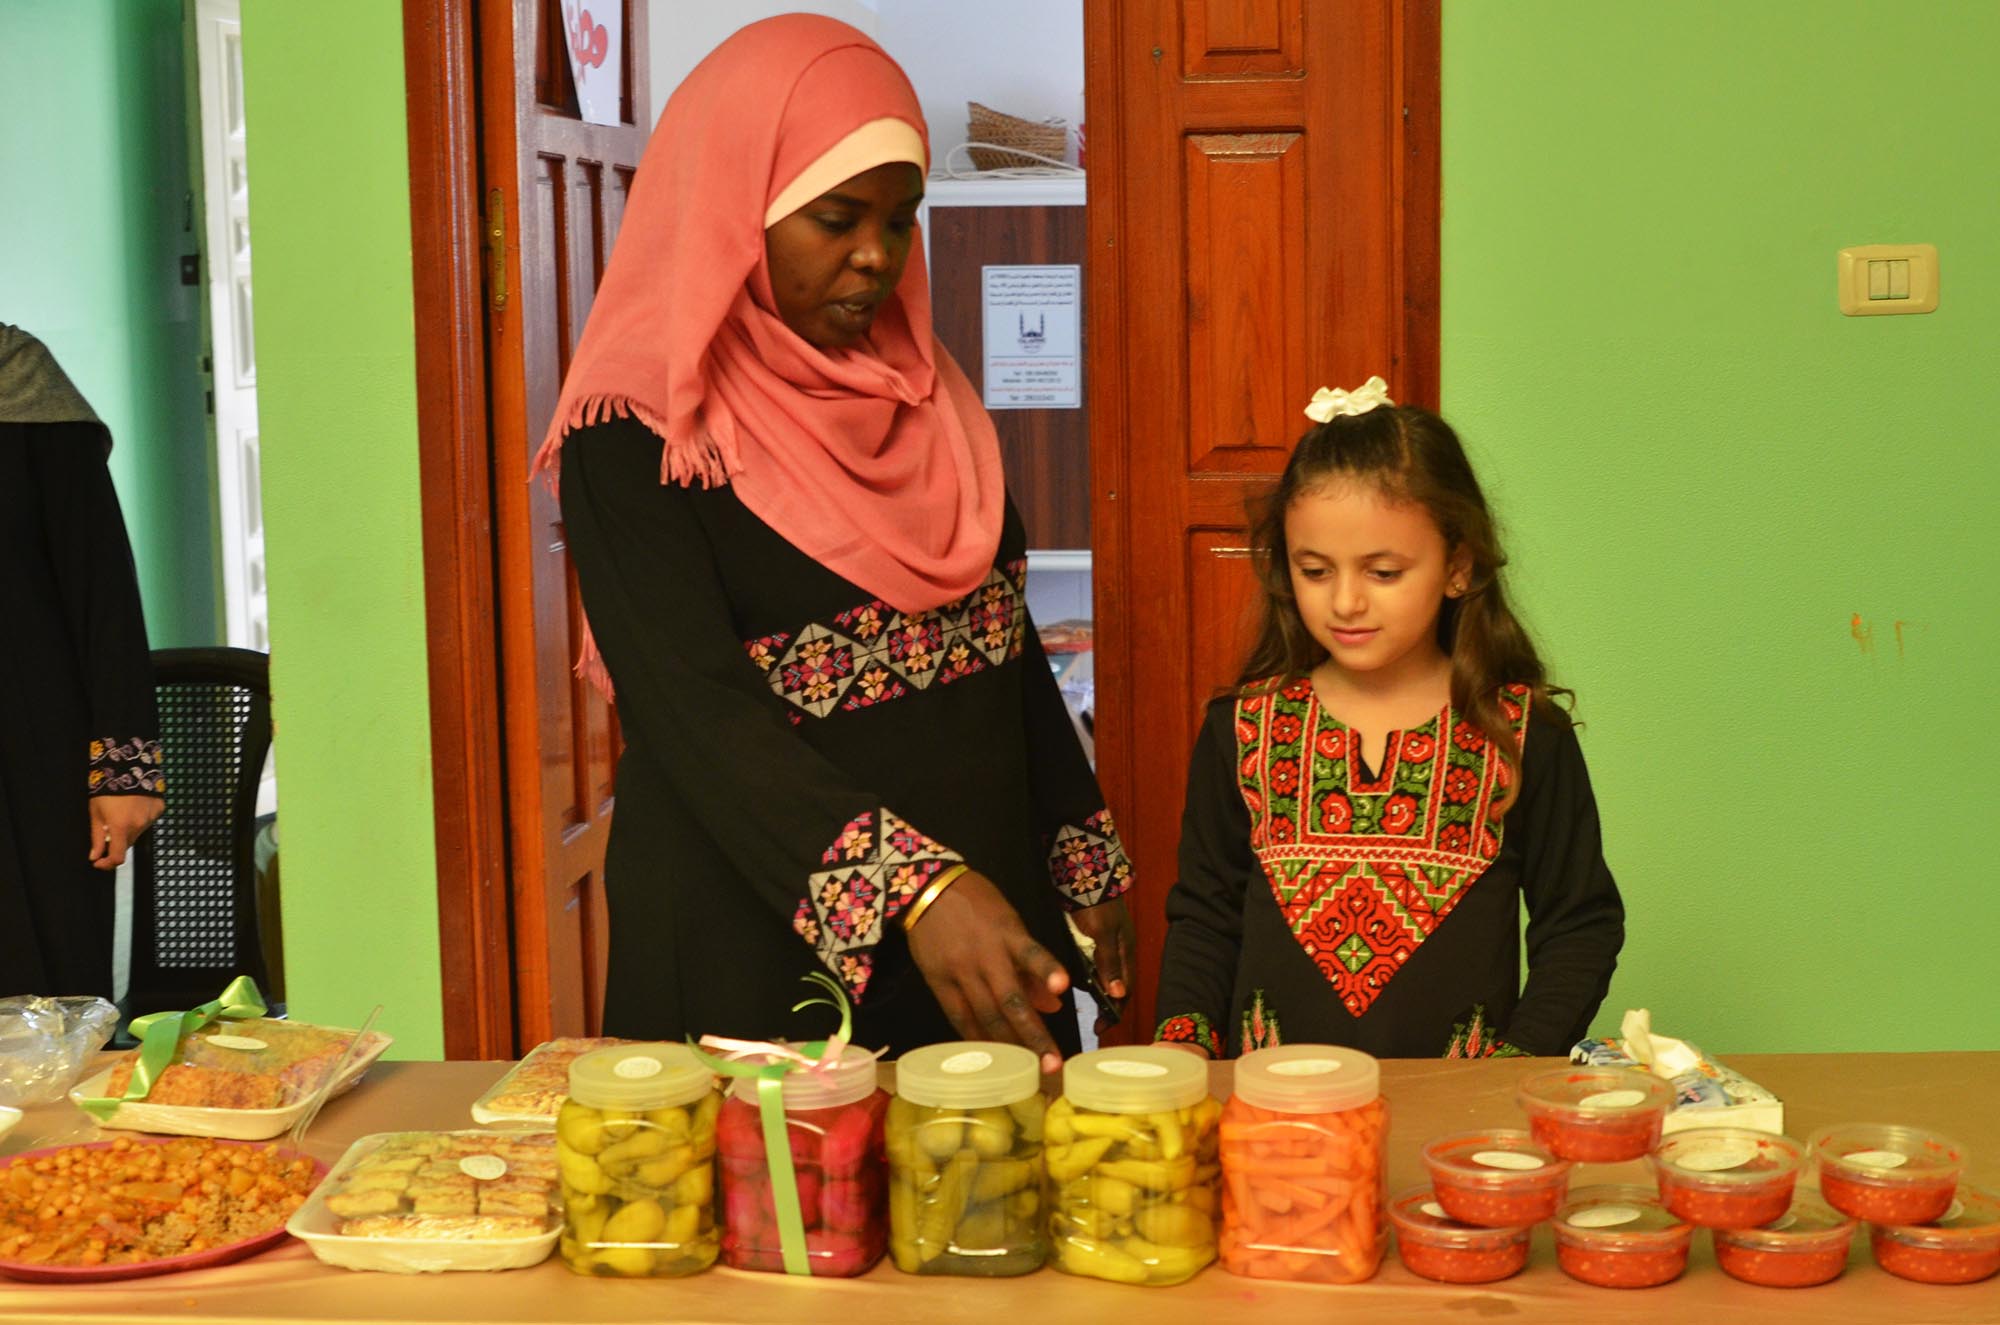 Aziza shows a young girl how to pickle vegetables.